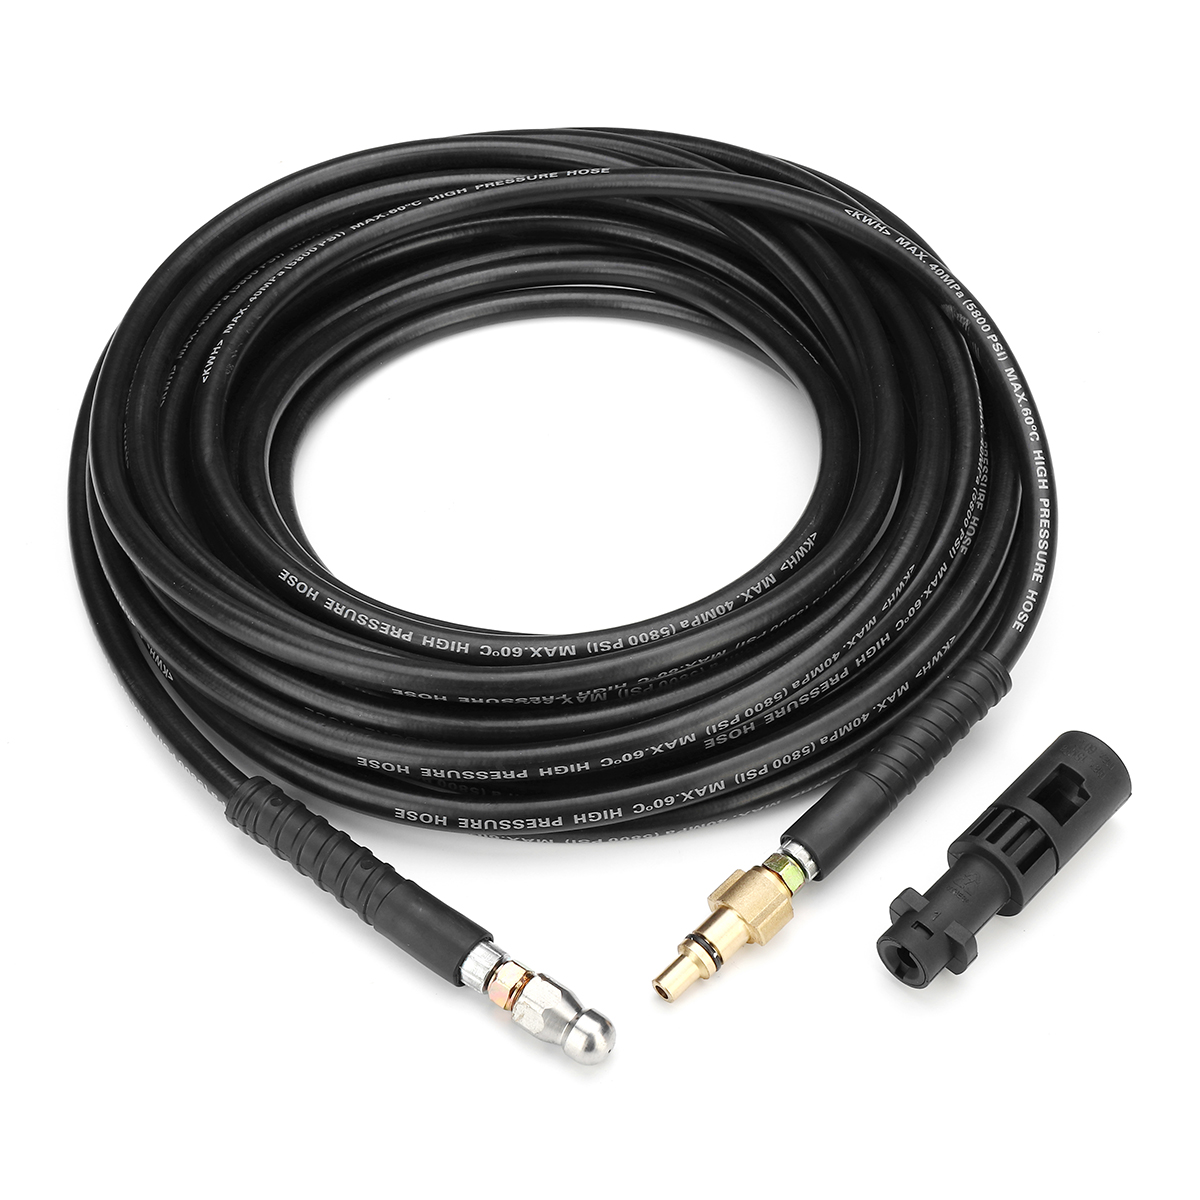 15M-5800PSI-High-Pressure-Washer-Drain-Tube-Cleaning-Hose-Kit-Pipe-Cleaner-Unblocker-1396553-3